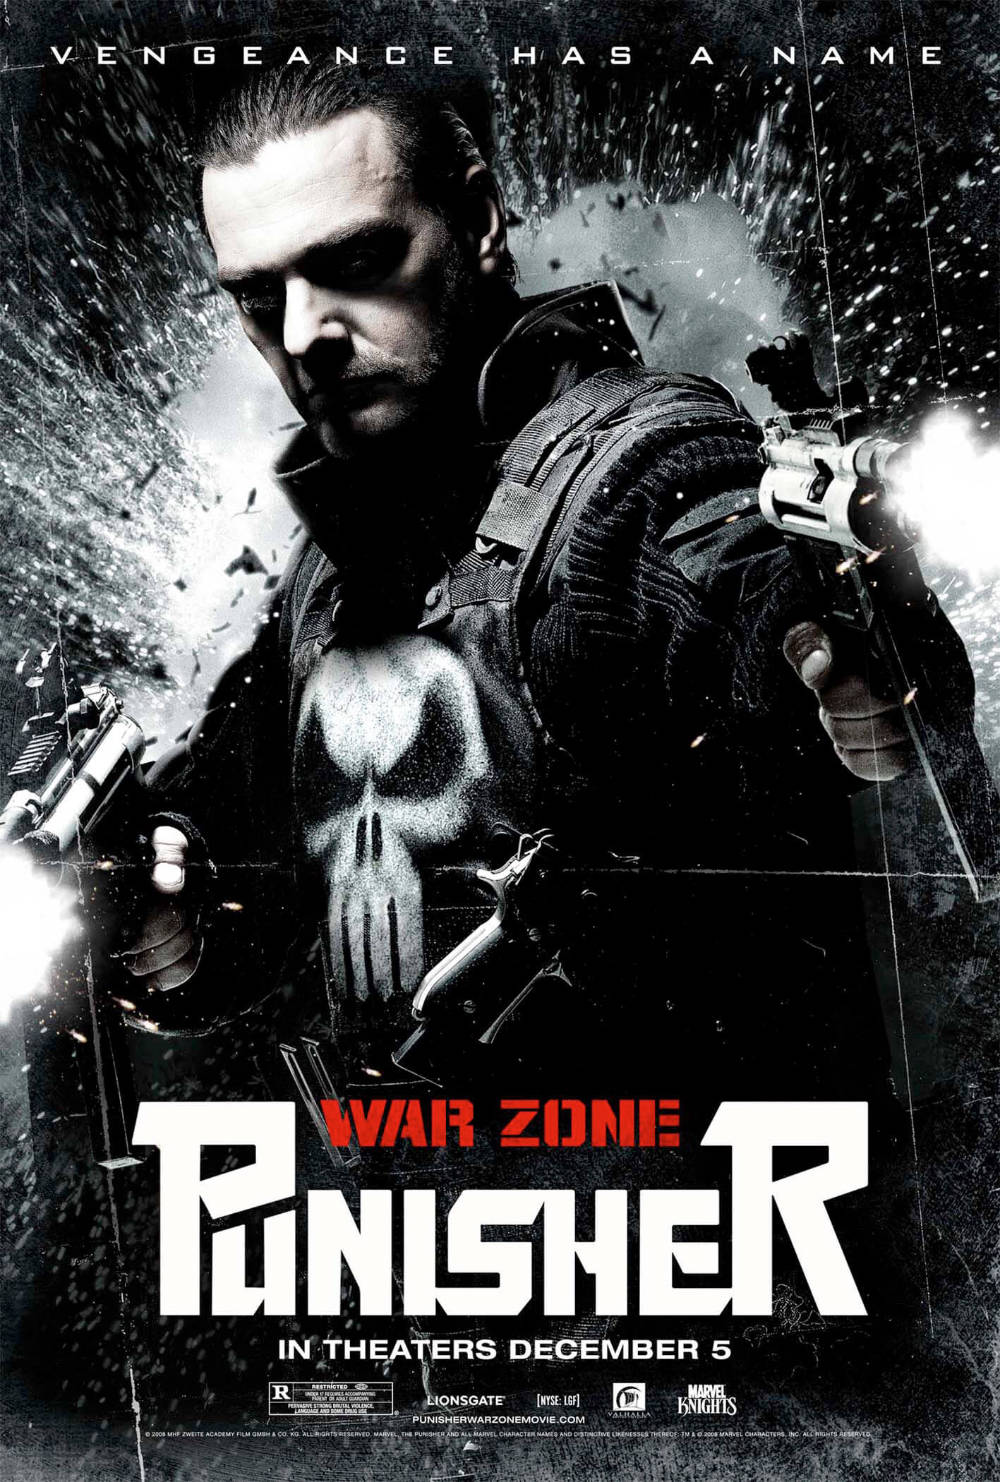 You are currently viewing Notes On A DVD: Punisher War Zone